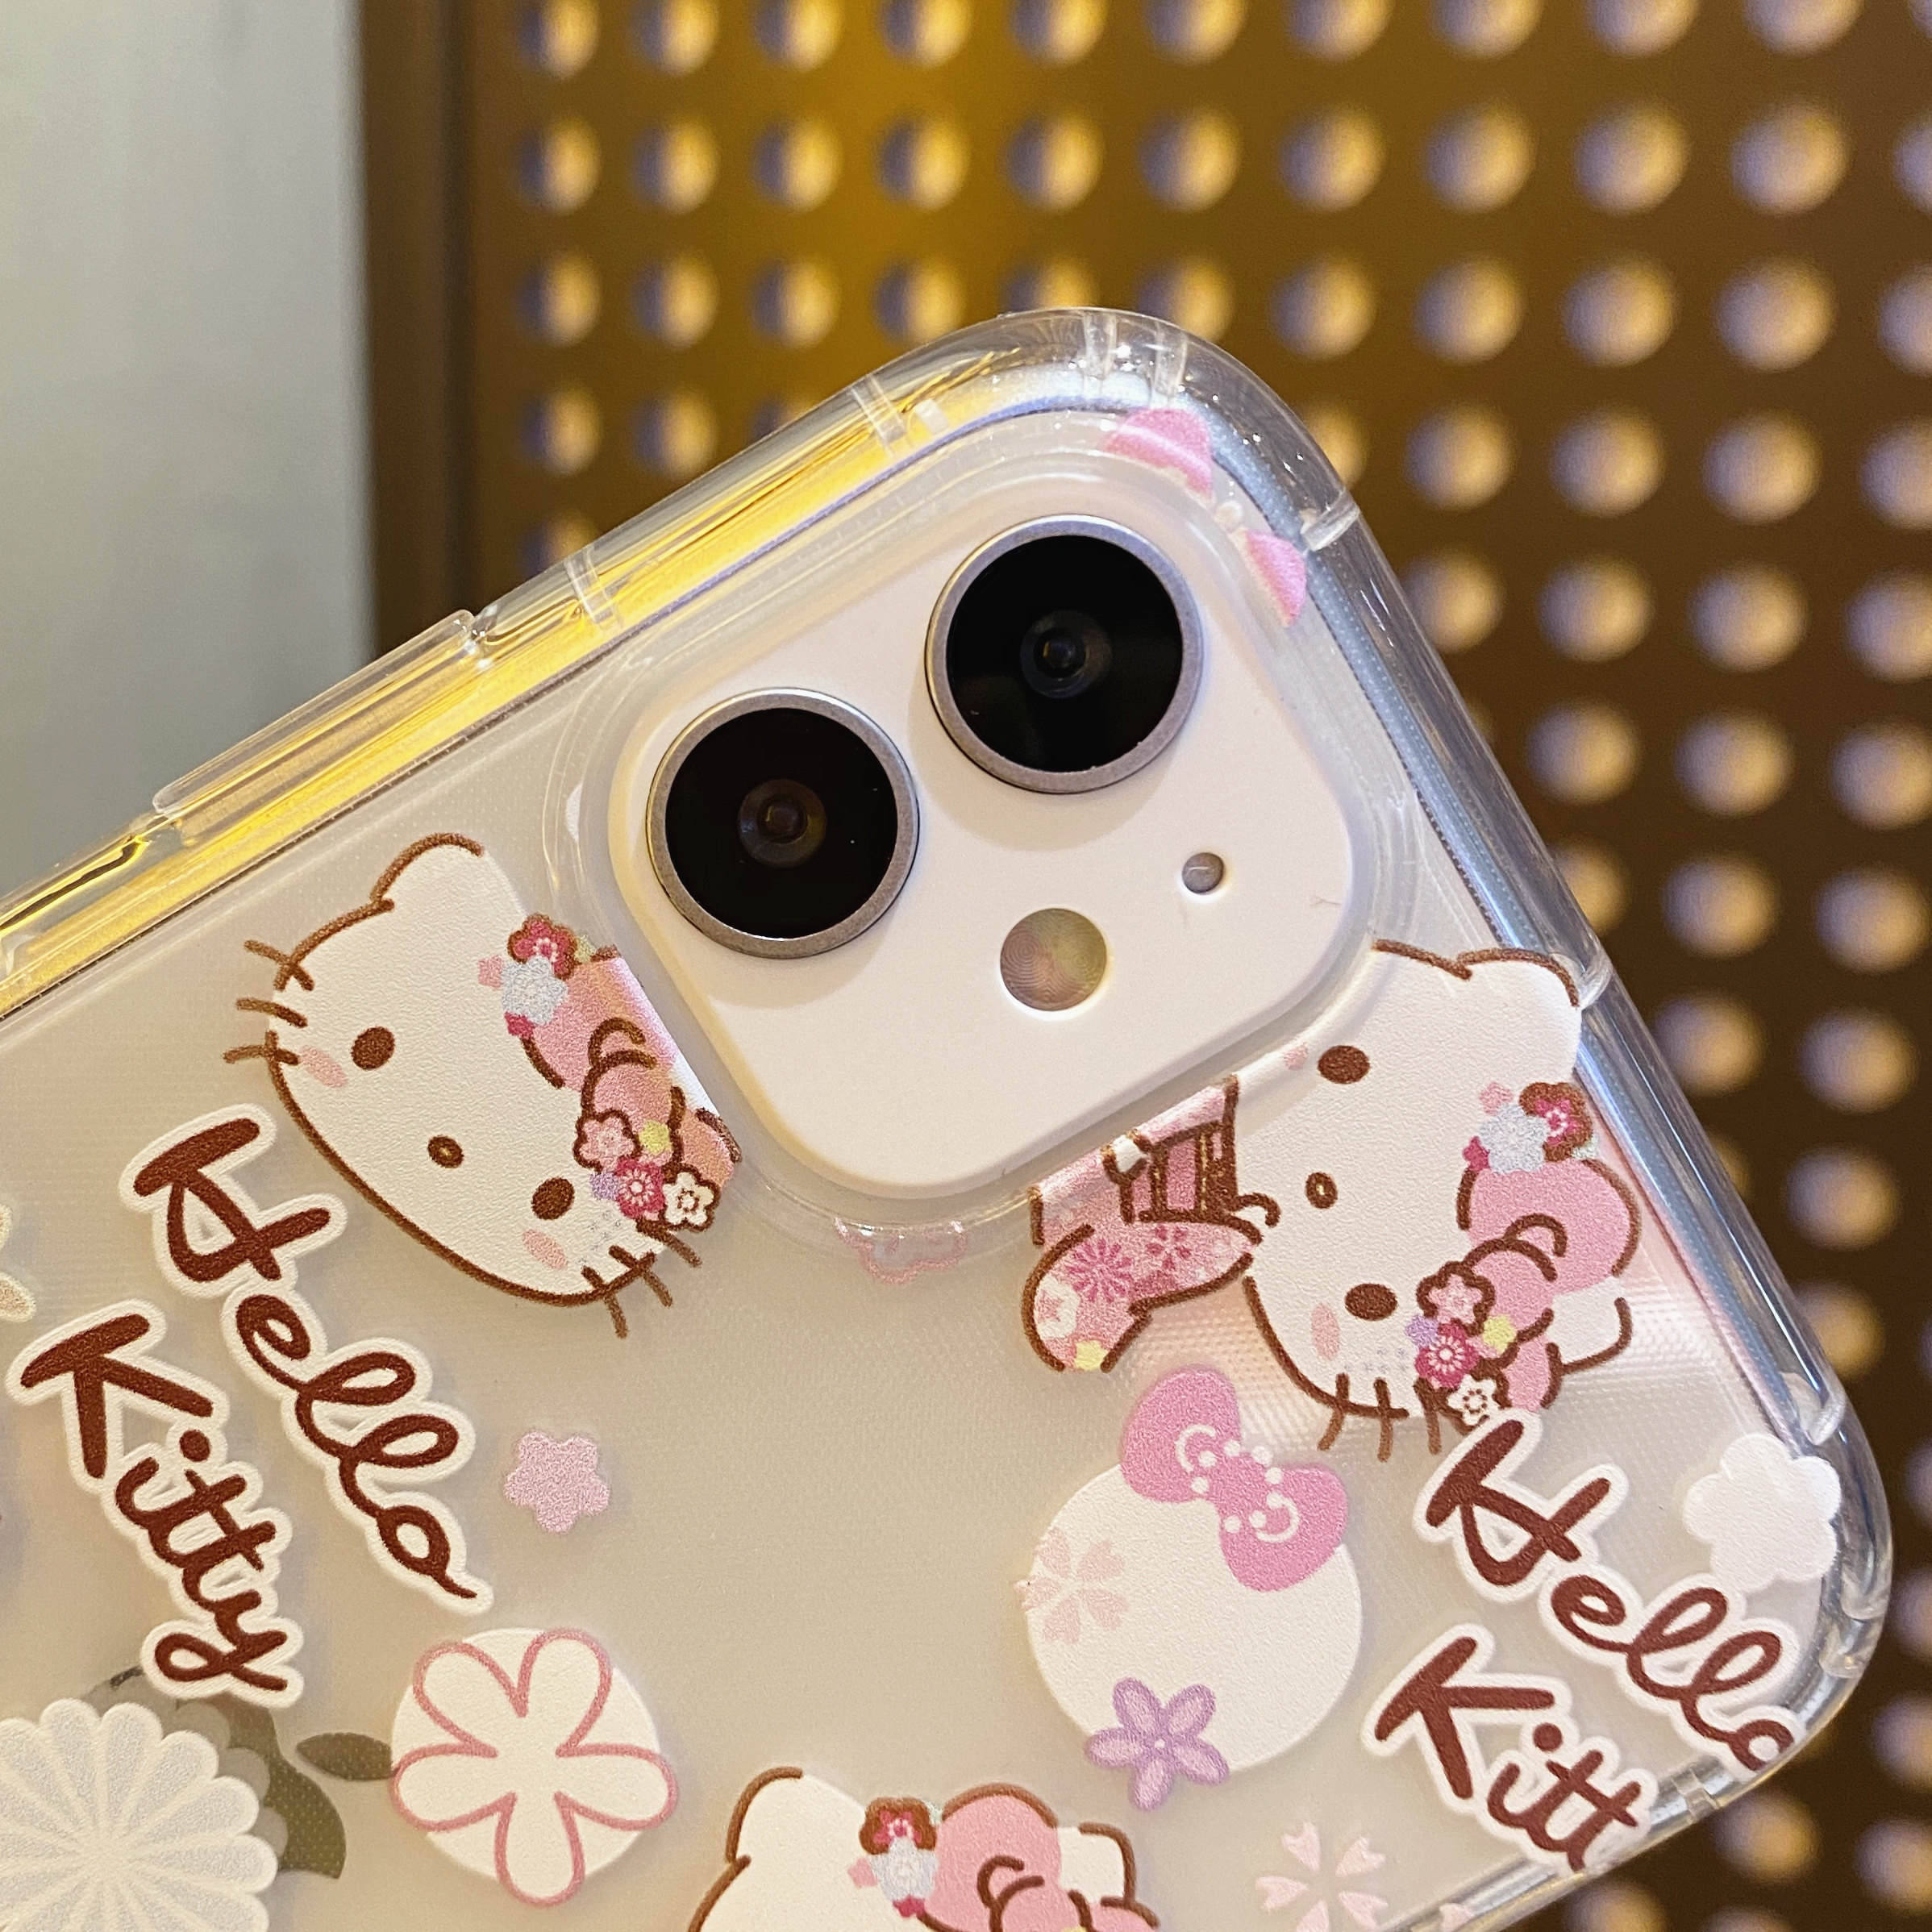 Cute iPhone 7 8 Plus 7+ 8+ X XS XR 11 11Pro 12 Mini 12Mini Pro Max XSMax SE 2020 insta Style Casetify Tide Brand Cute Hello Kitty Receipt Label Ticket Lens Protection Flexible Soft Silicone TPU Case Cover Anti-Drop Casing